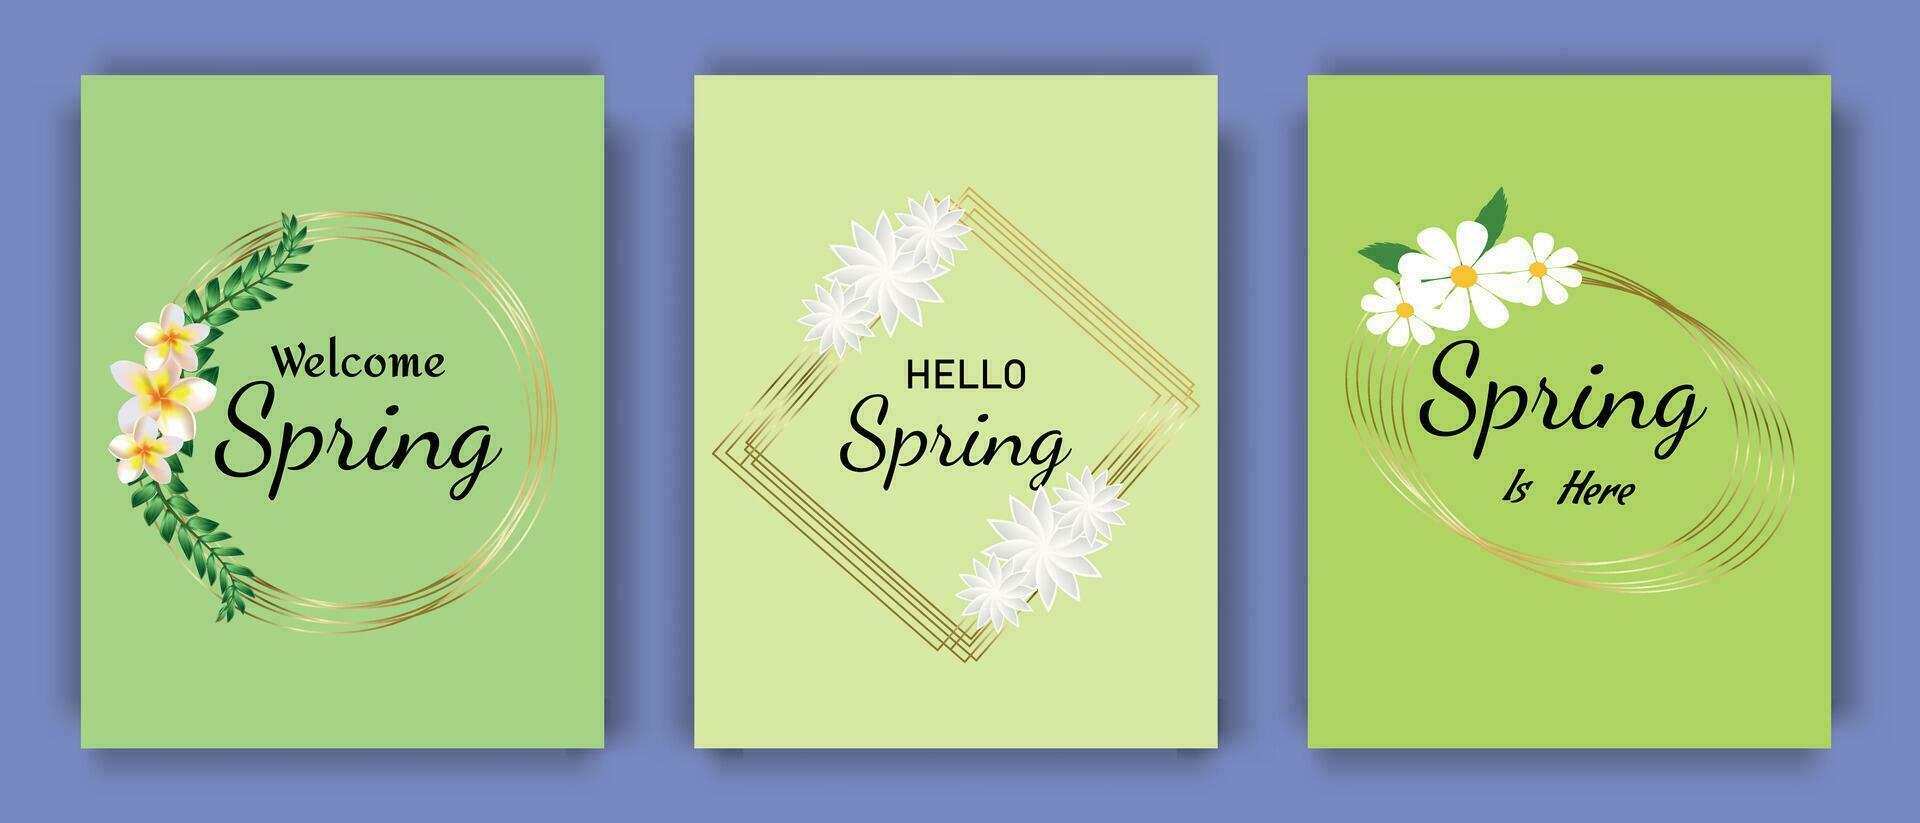 Stylish spring posters with golden geometric shapes, flowers and lettering. Spring content. Vector illustration.